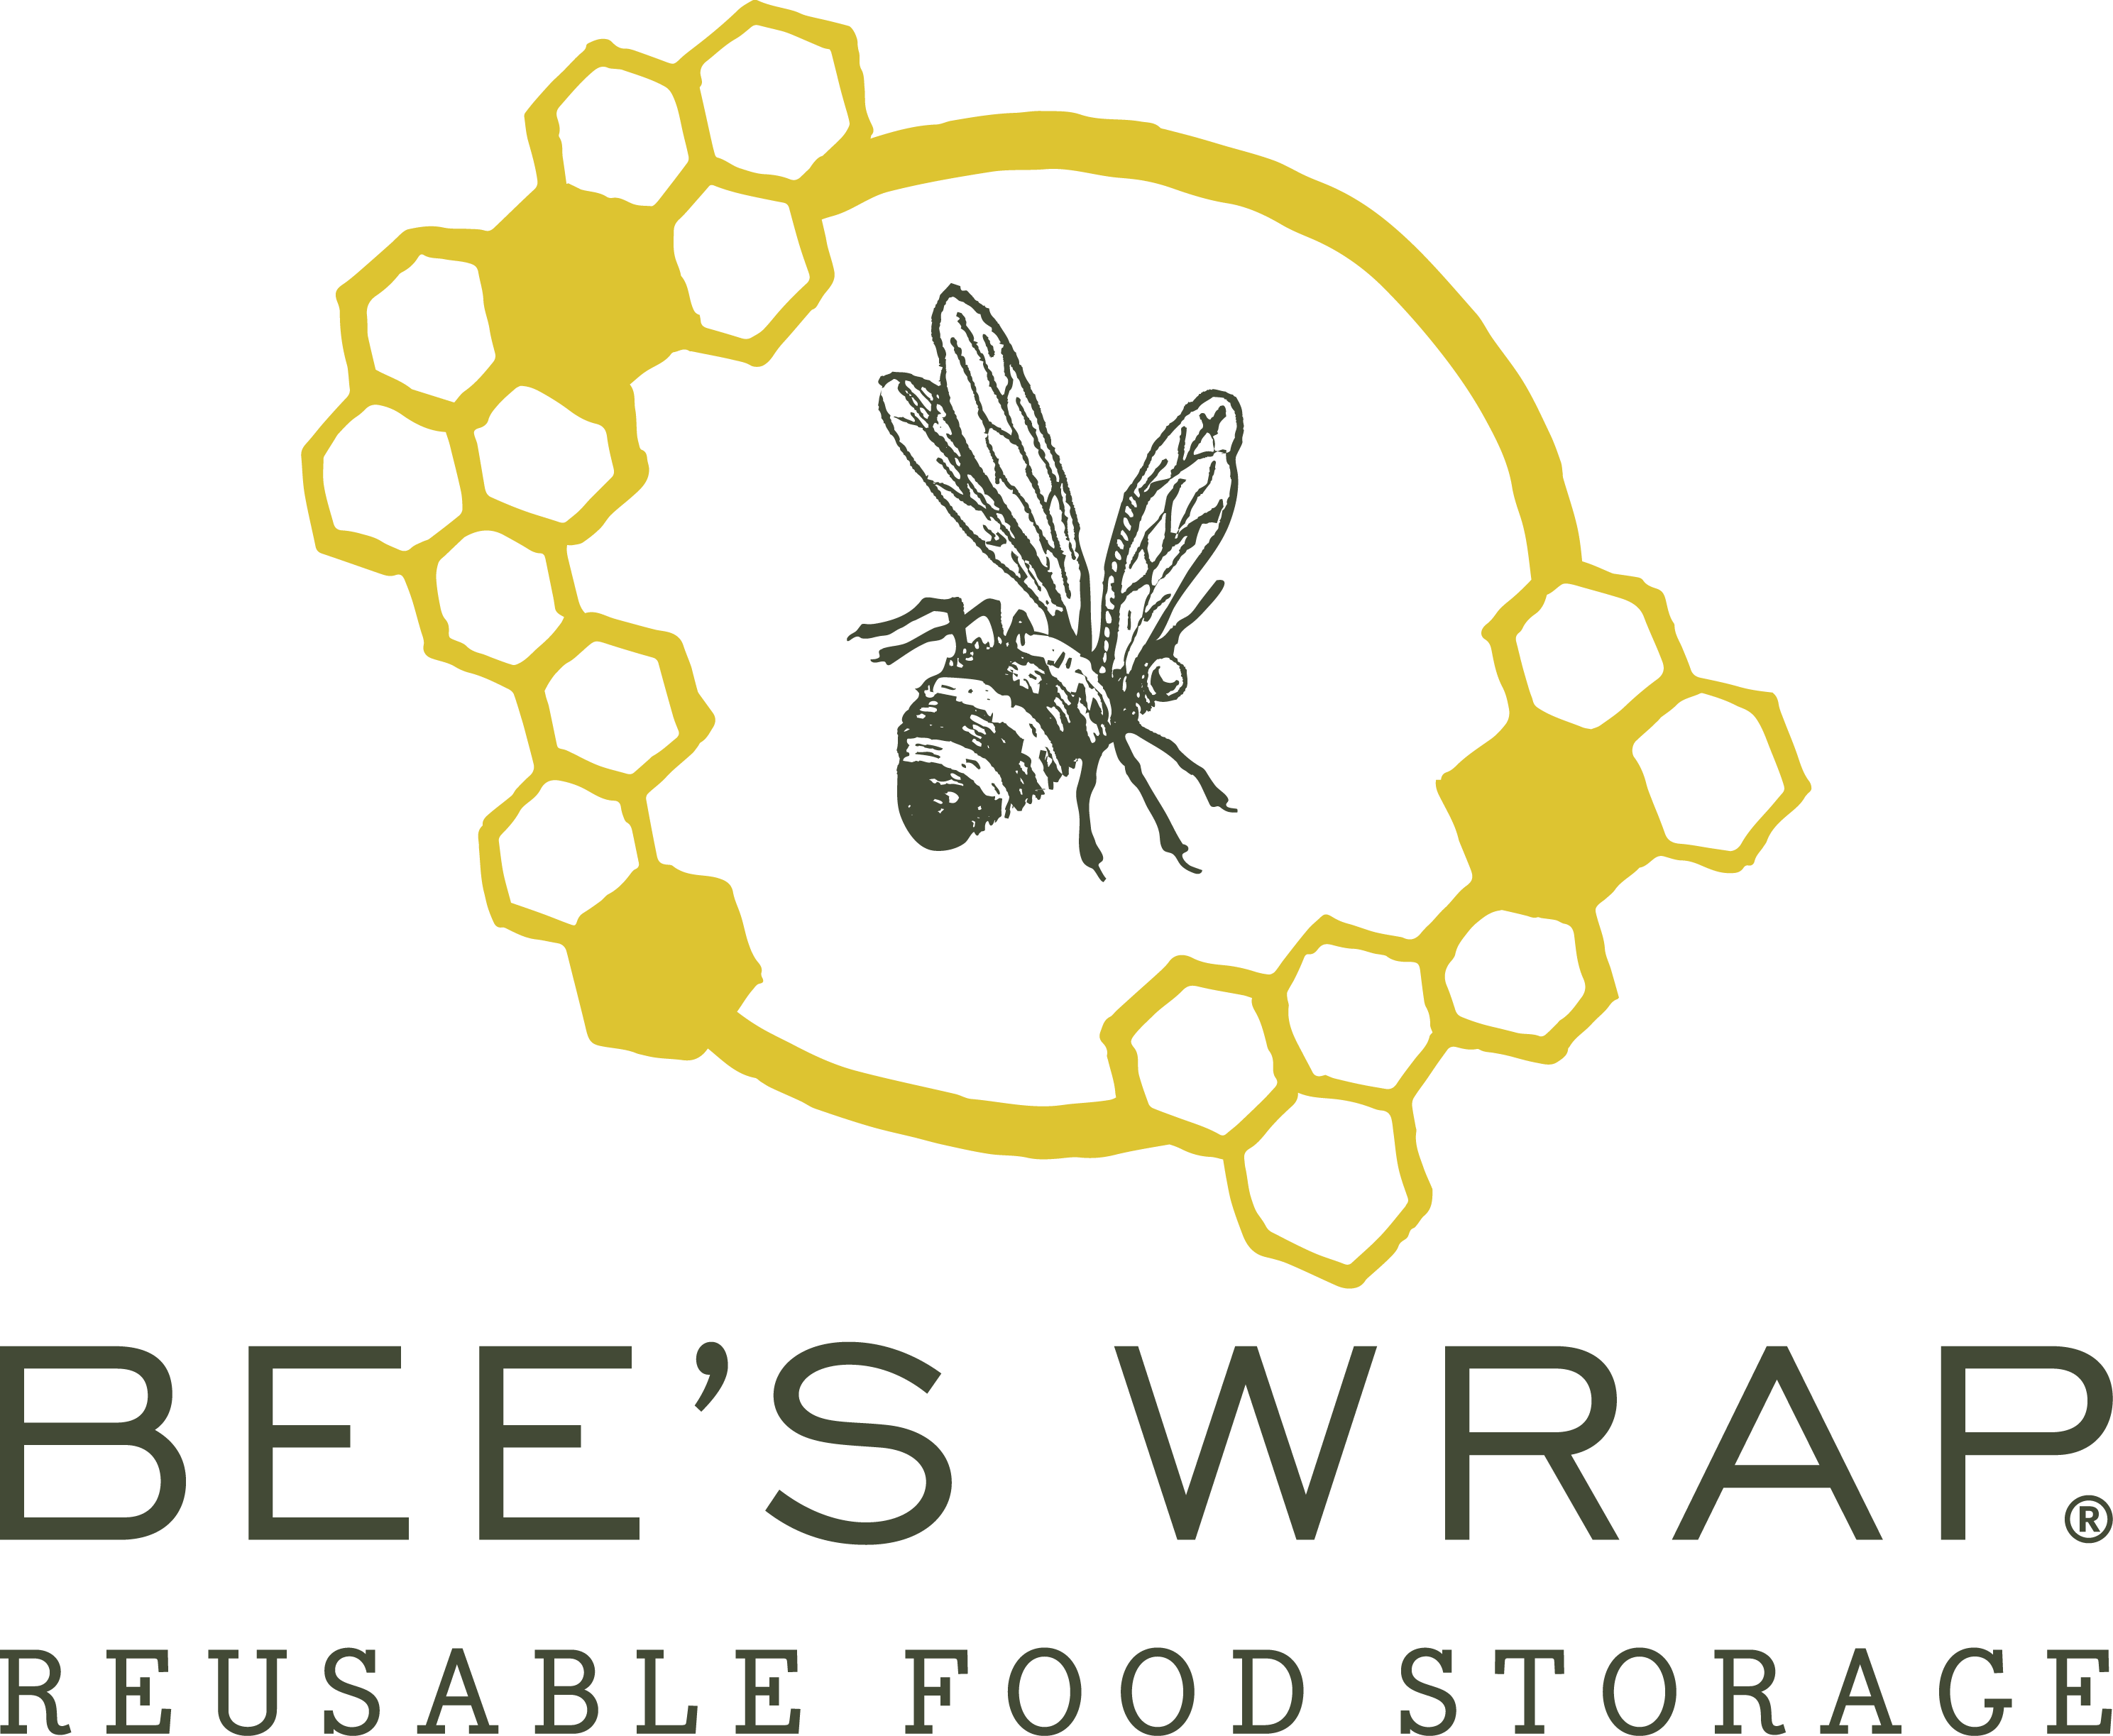 Bees Wrap Food Storage Wraps that are sustainable.